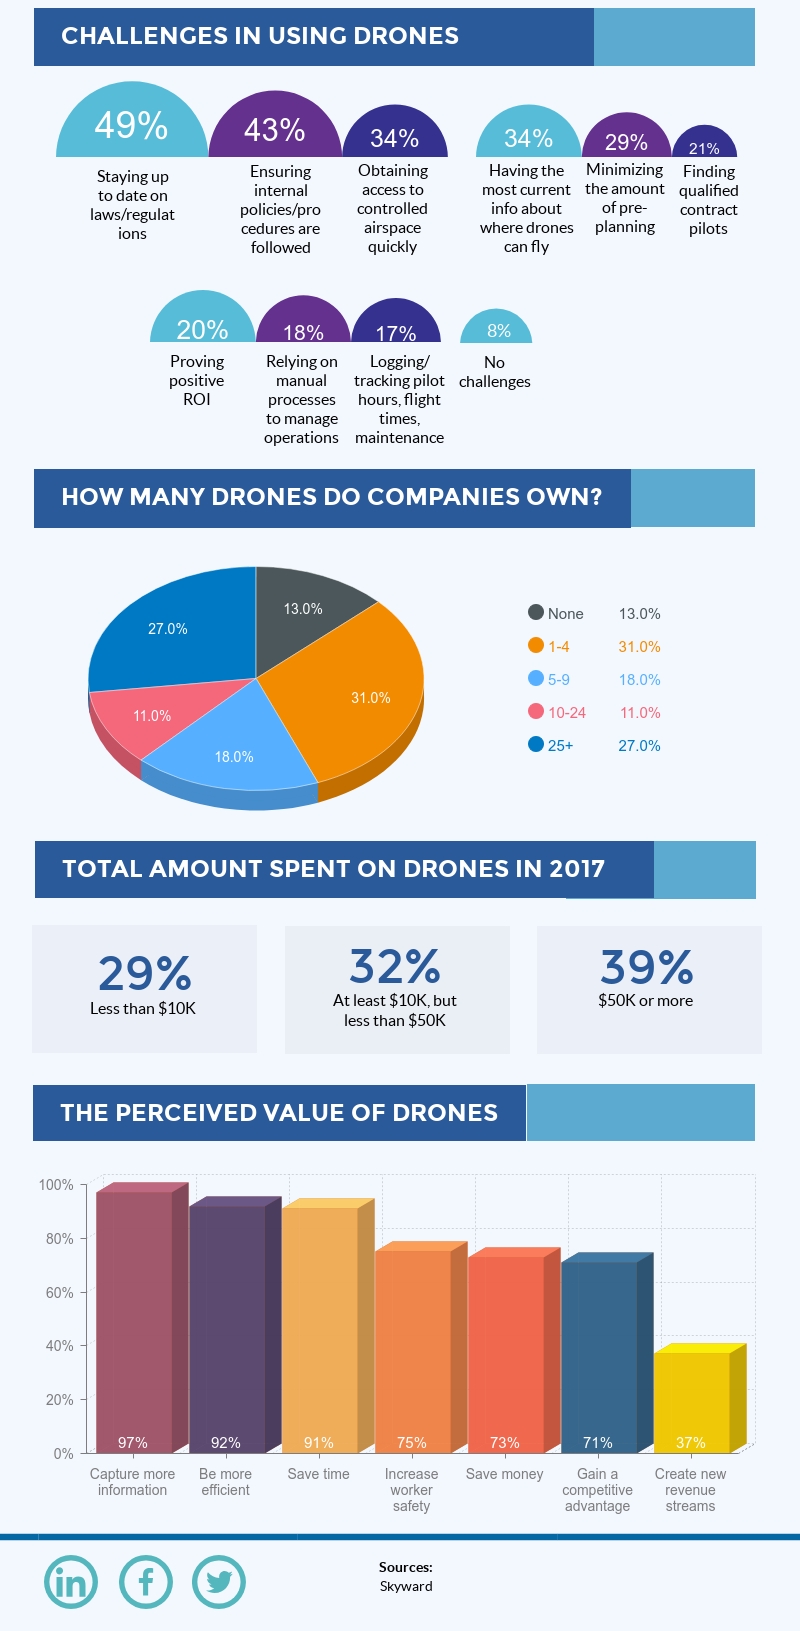 When having such revolutionizing drones, challenges have to be considered, as well as the budget and potential revenue.